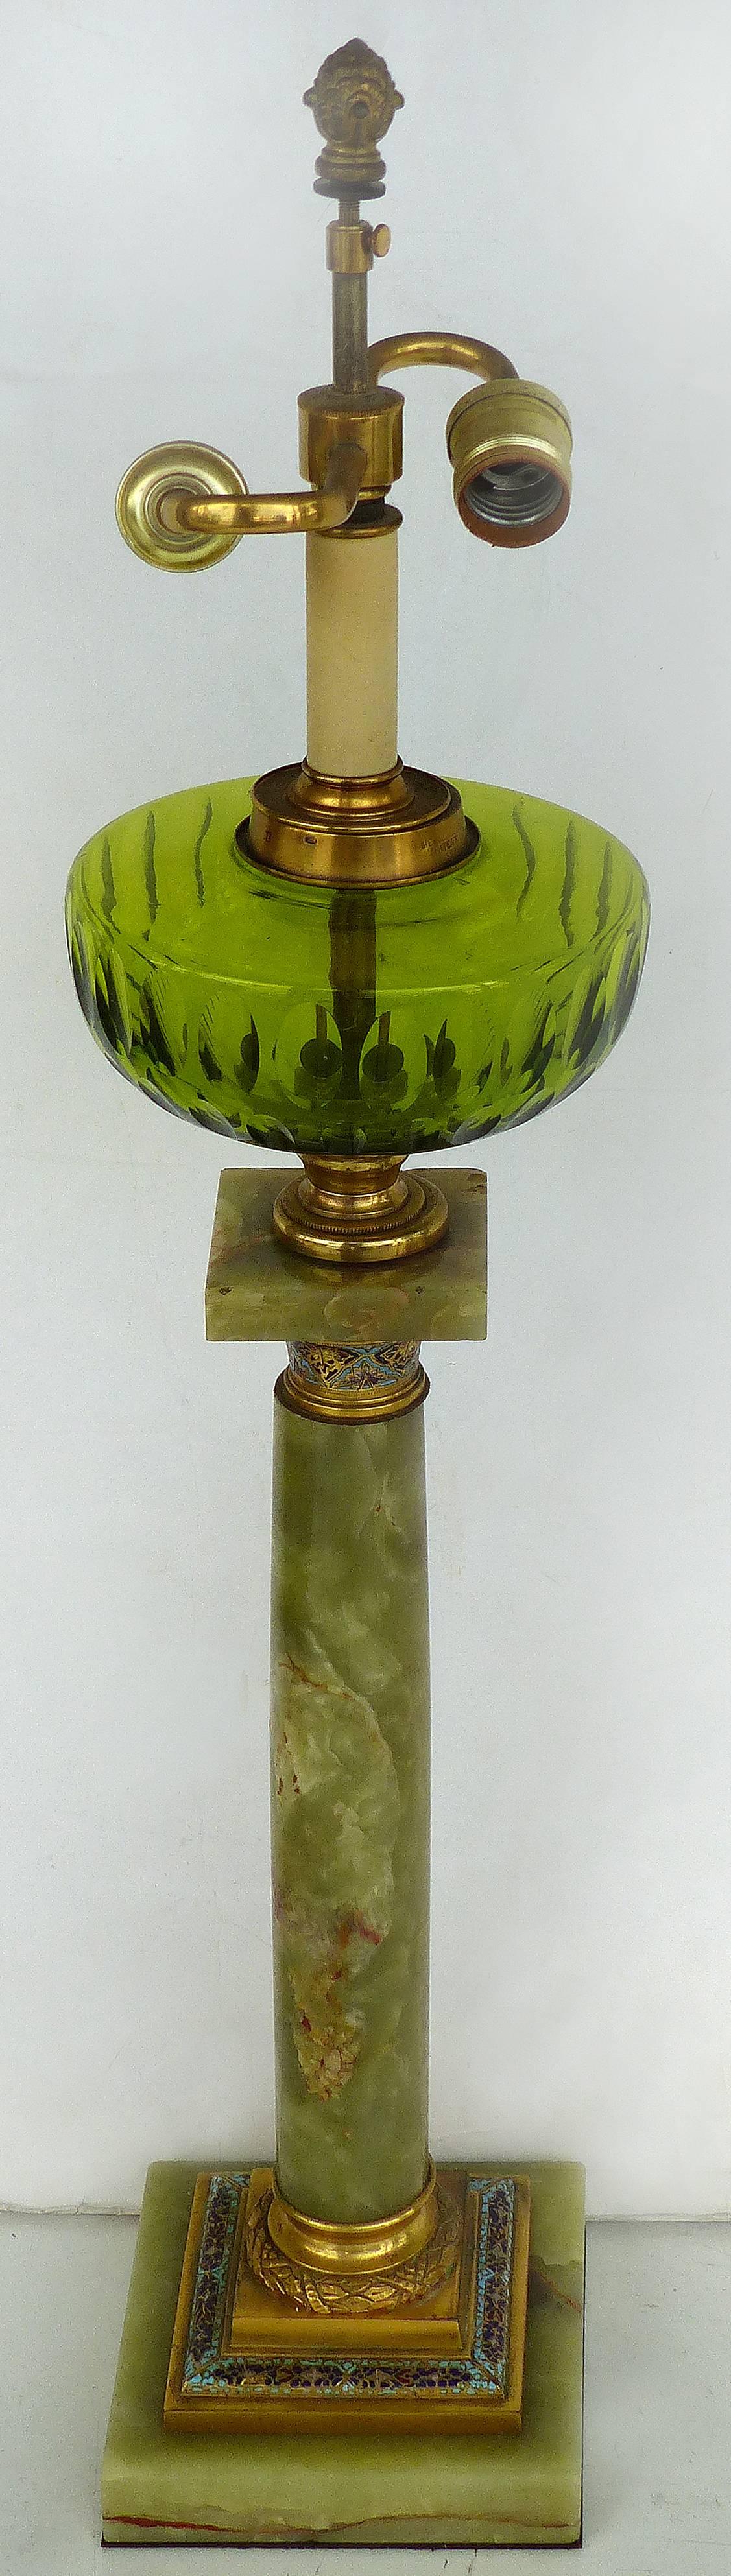 19th Century Onyx and Cloisonne Converted Banquet Oil Table Lamp

Offered for sale is an elegant circa 1880s, French onyx and cloisonne oil lamp that has been converted to an electrified banquet table lamp. The lamp has a green glass well which is